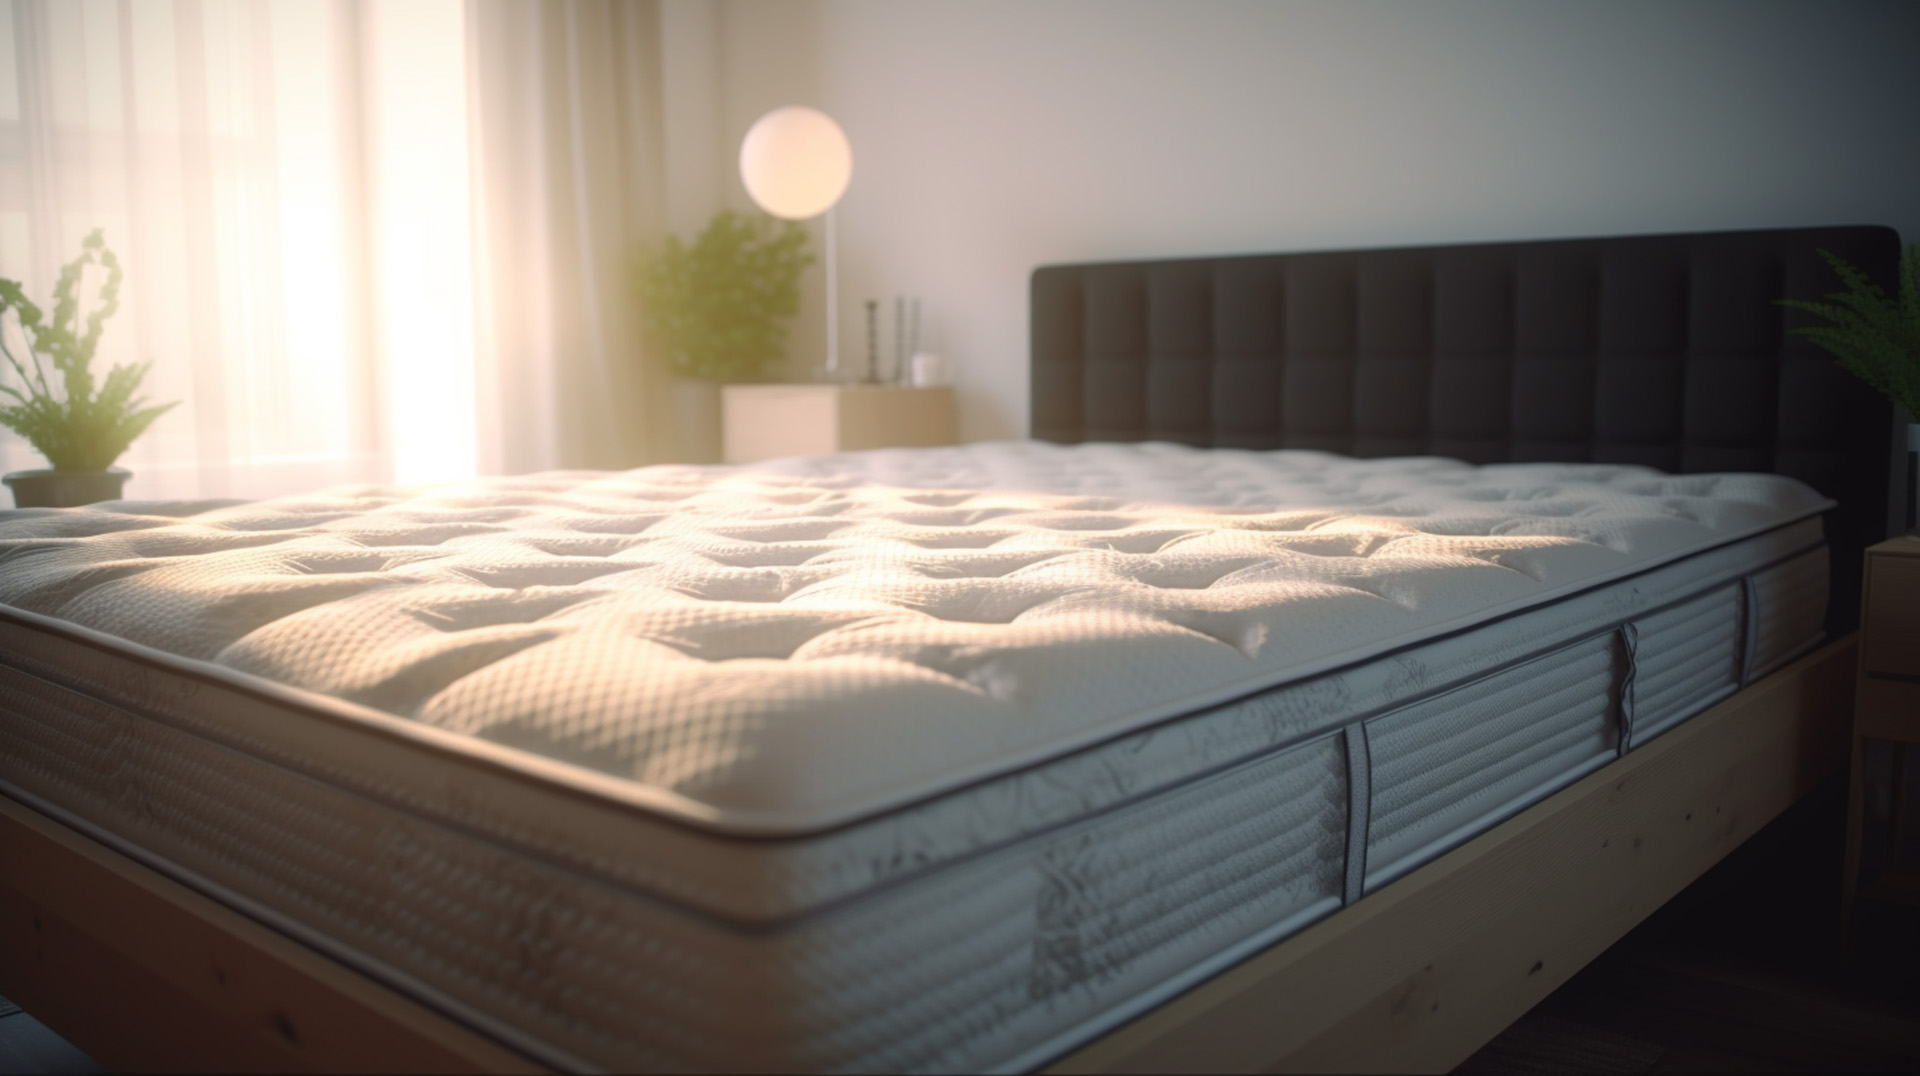 Shop Organic Mattresses and Beds in Shawnee, KS